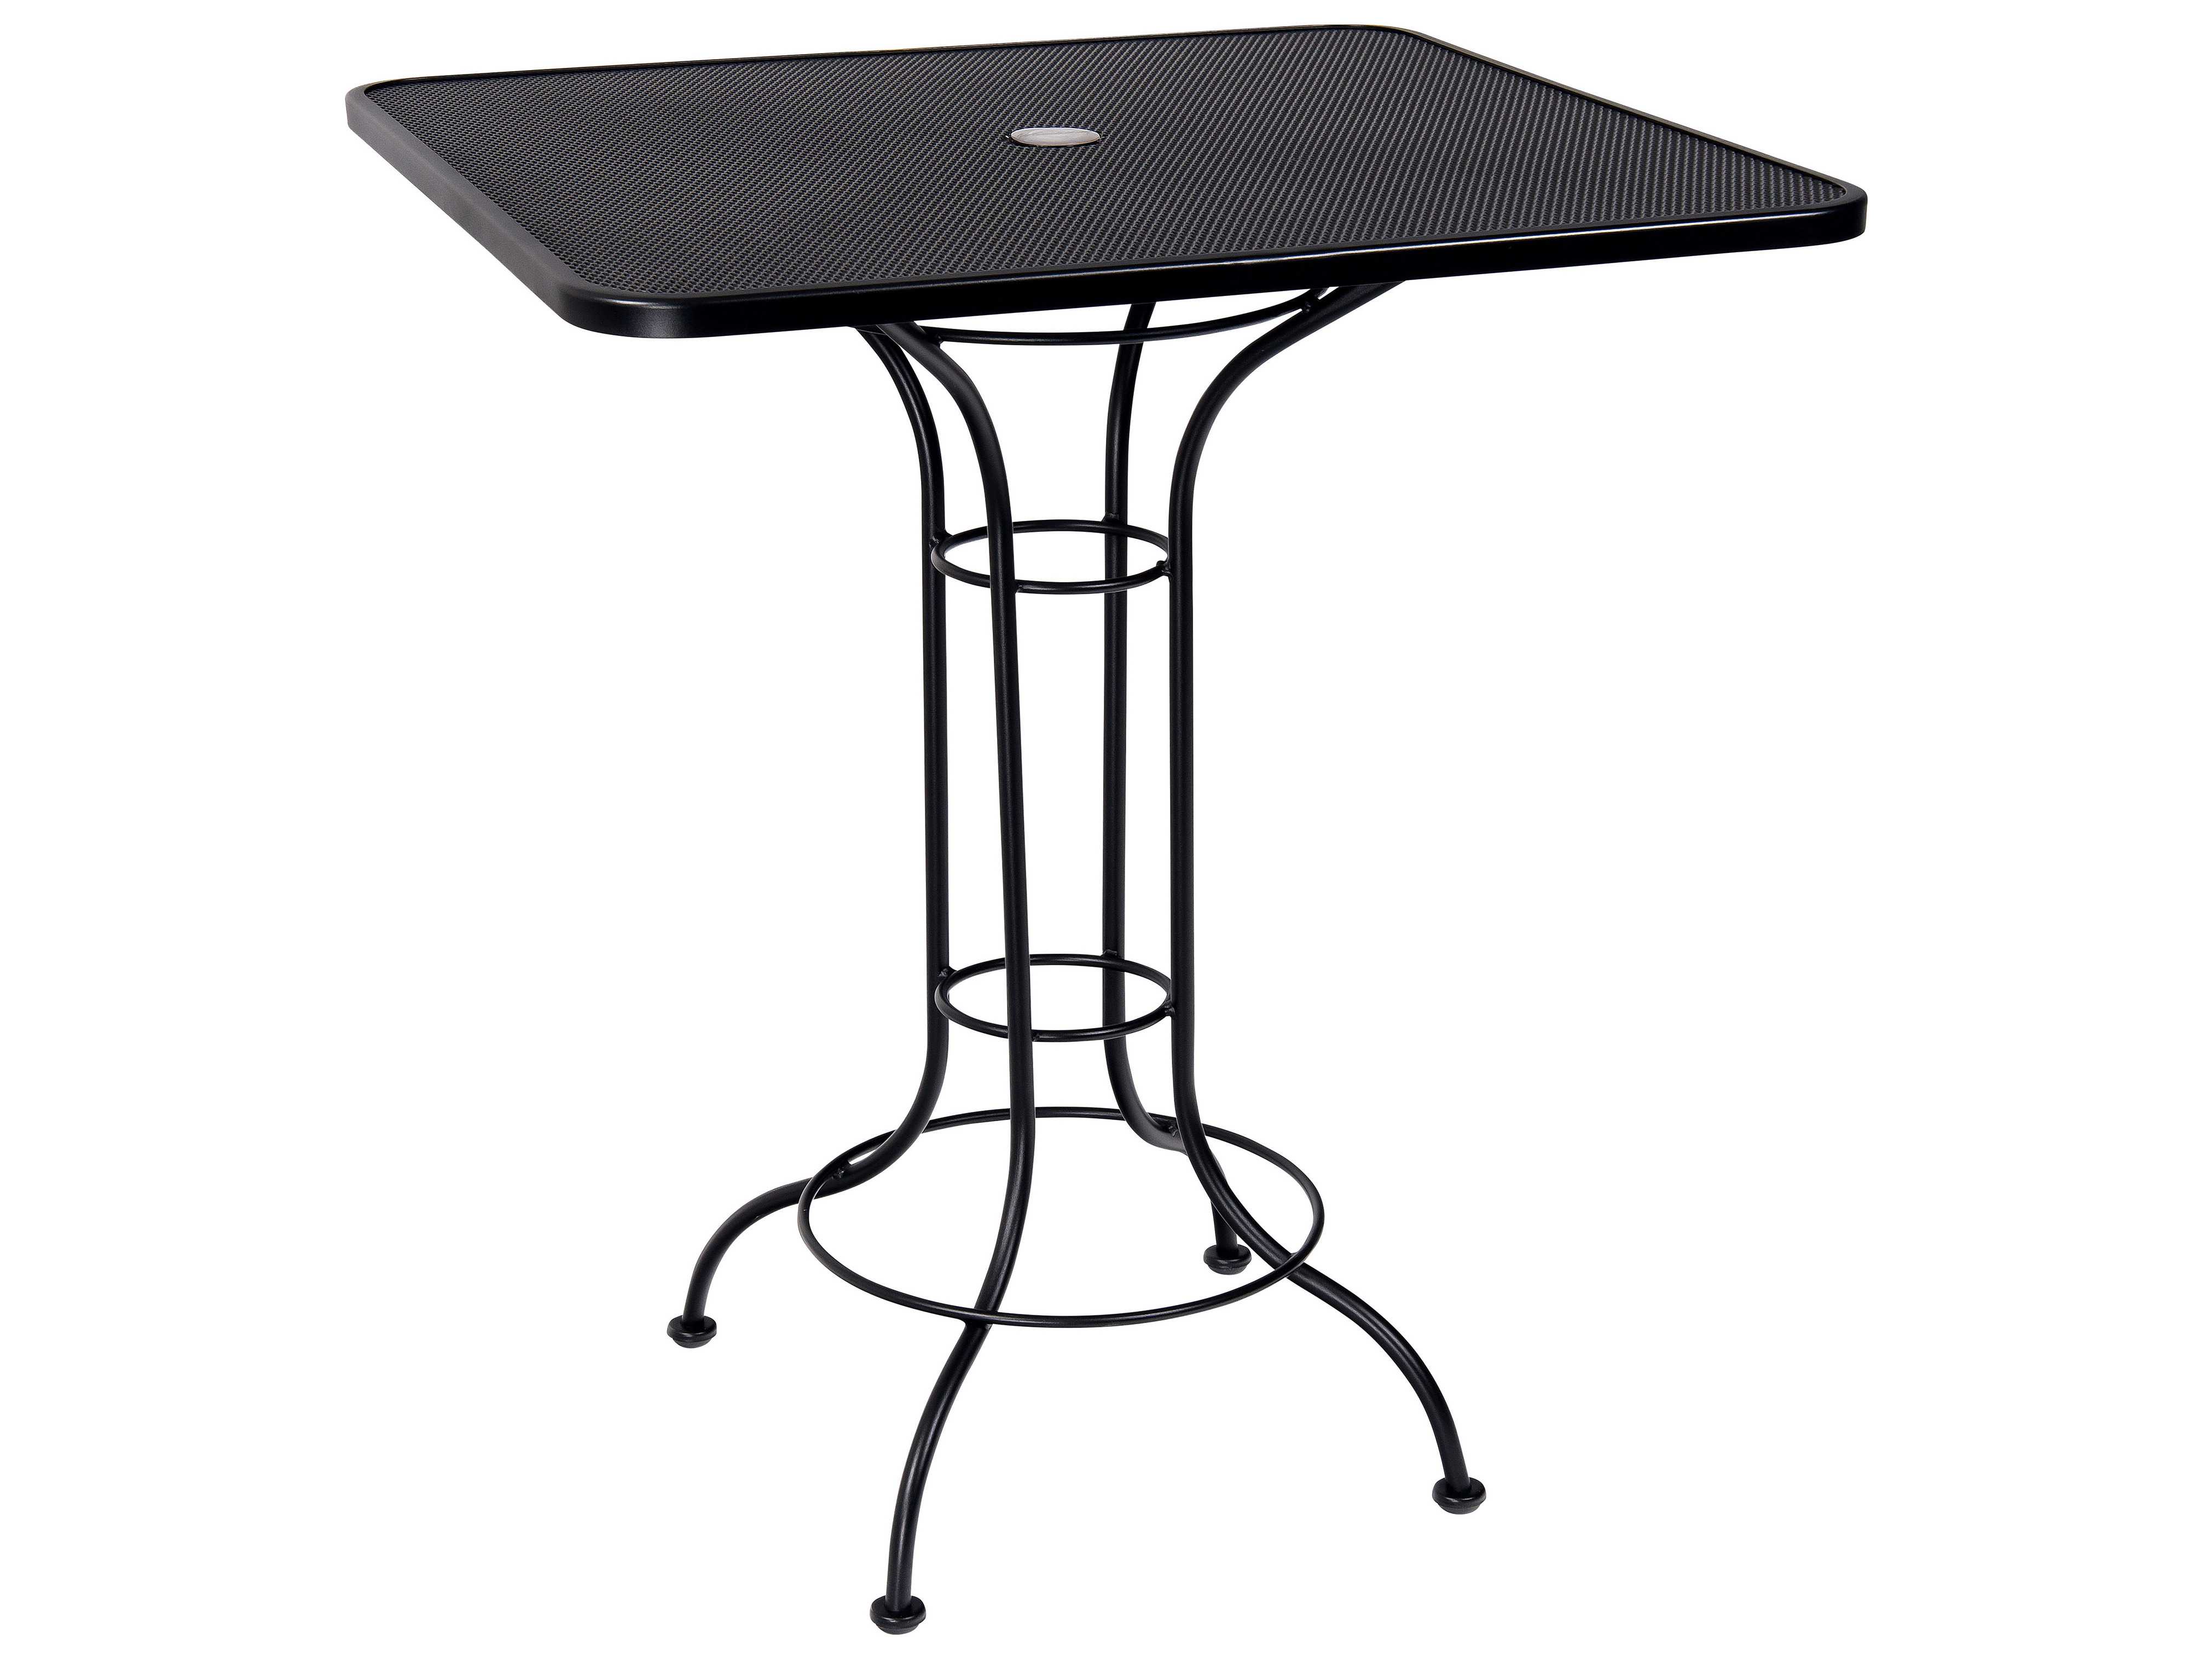 Woodard Micro Mesh Wrought Iron 36 Square Bar Height Table With